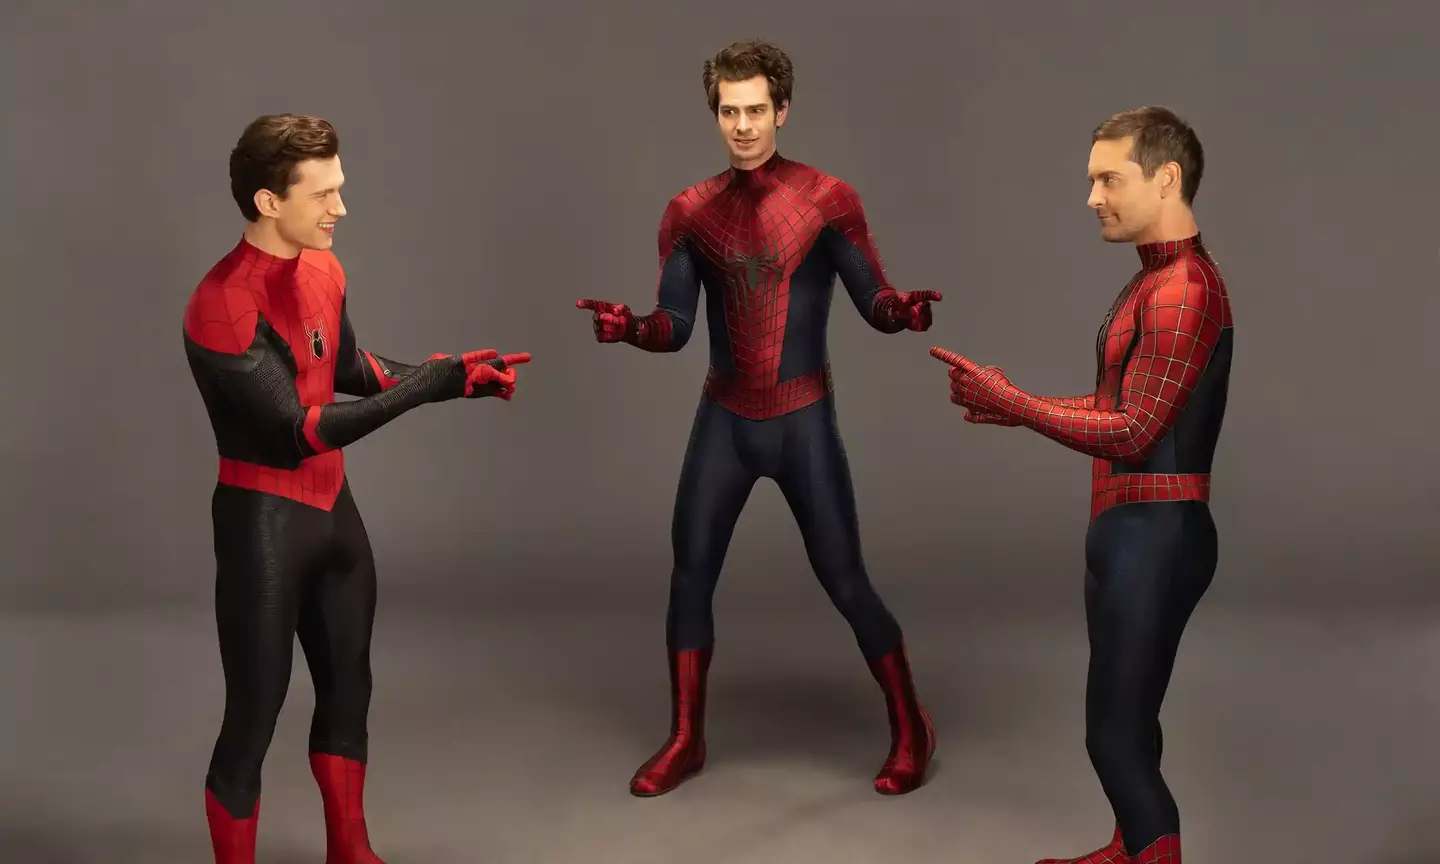 The trio bonded over their recreation of the iconic Spiderman pointing meme.